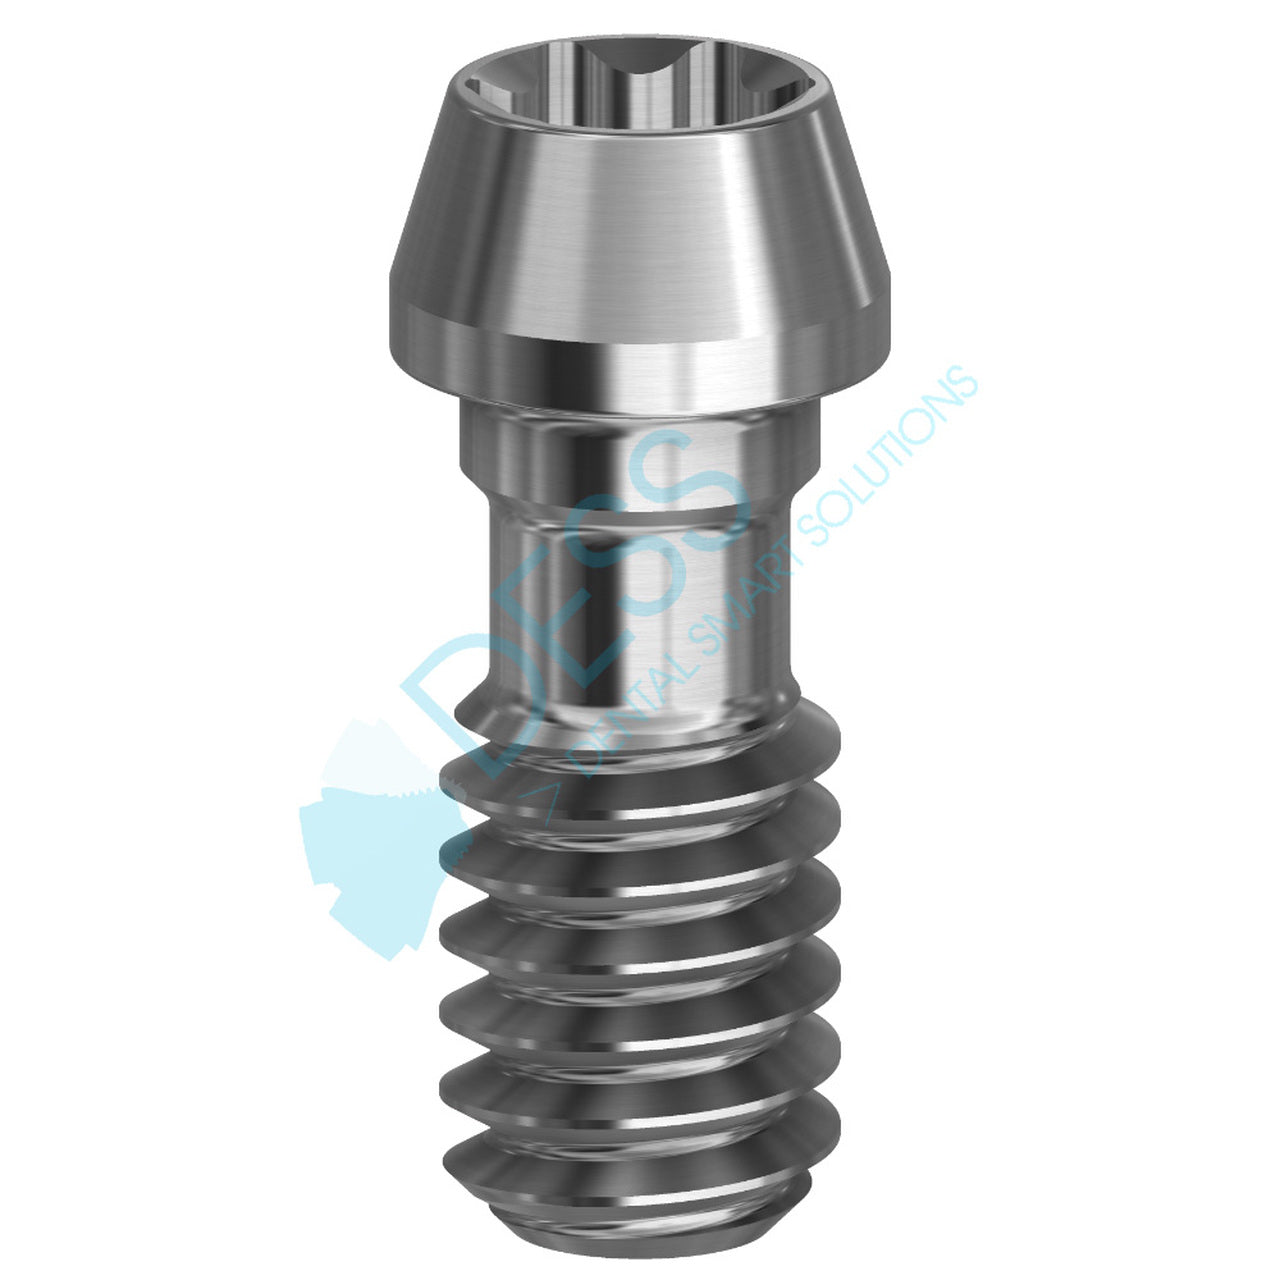 Torx® Screw ANGLEBase® compatible with Neodent Grand Morse®